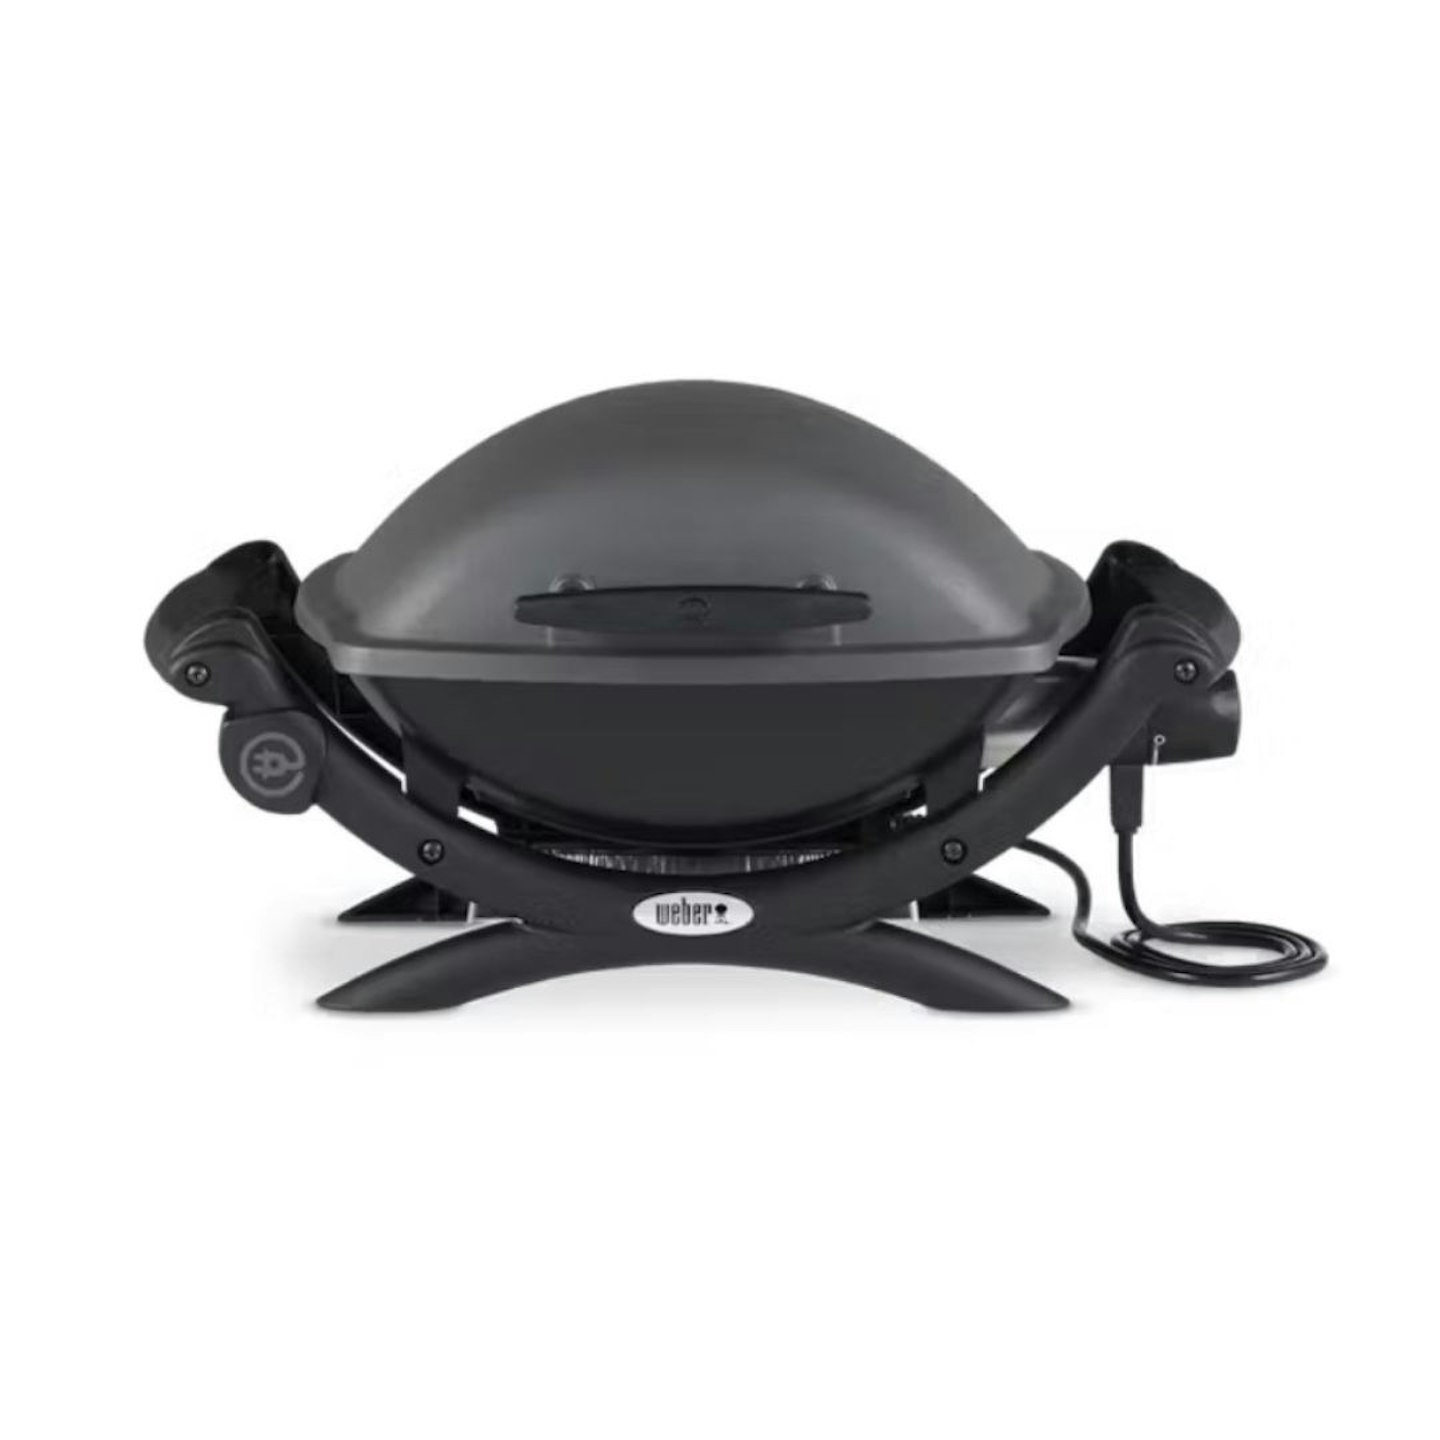 Weber Q 1400 Electric Barbecue